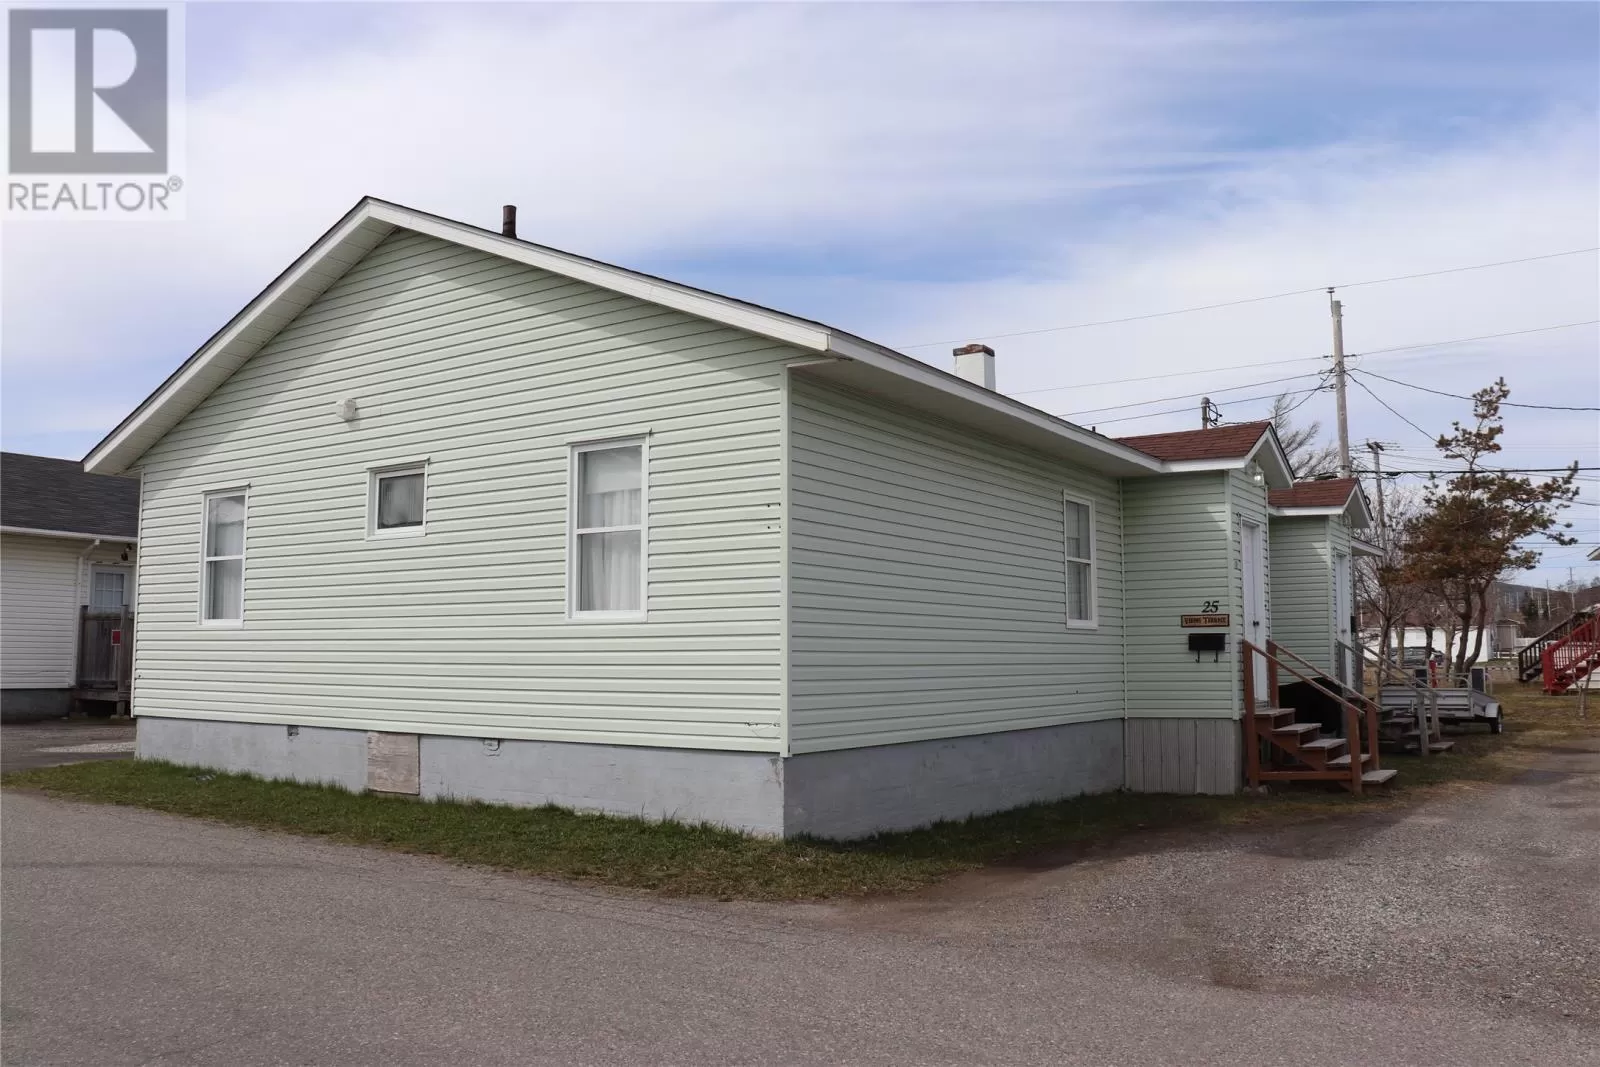 Two Apartment House for rent: 25-27 Viking Terrace, Stephenville, Newfoundland & Labrador A2N 1K1